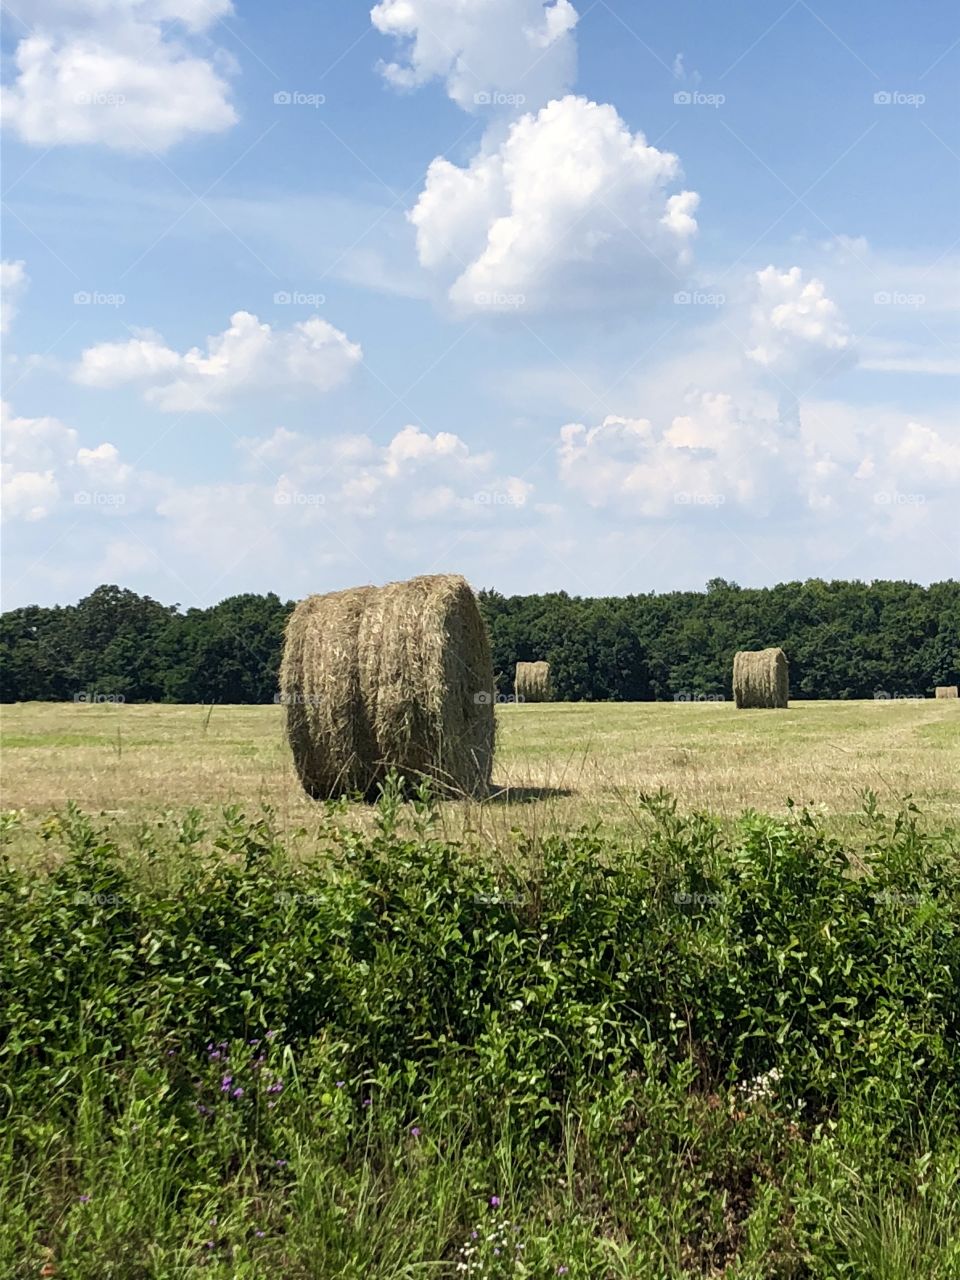 Hay bale in the field against a blue sky with puffy clouds. 